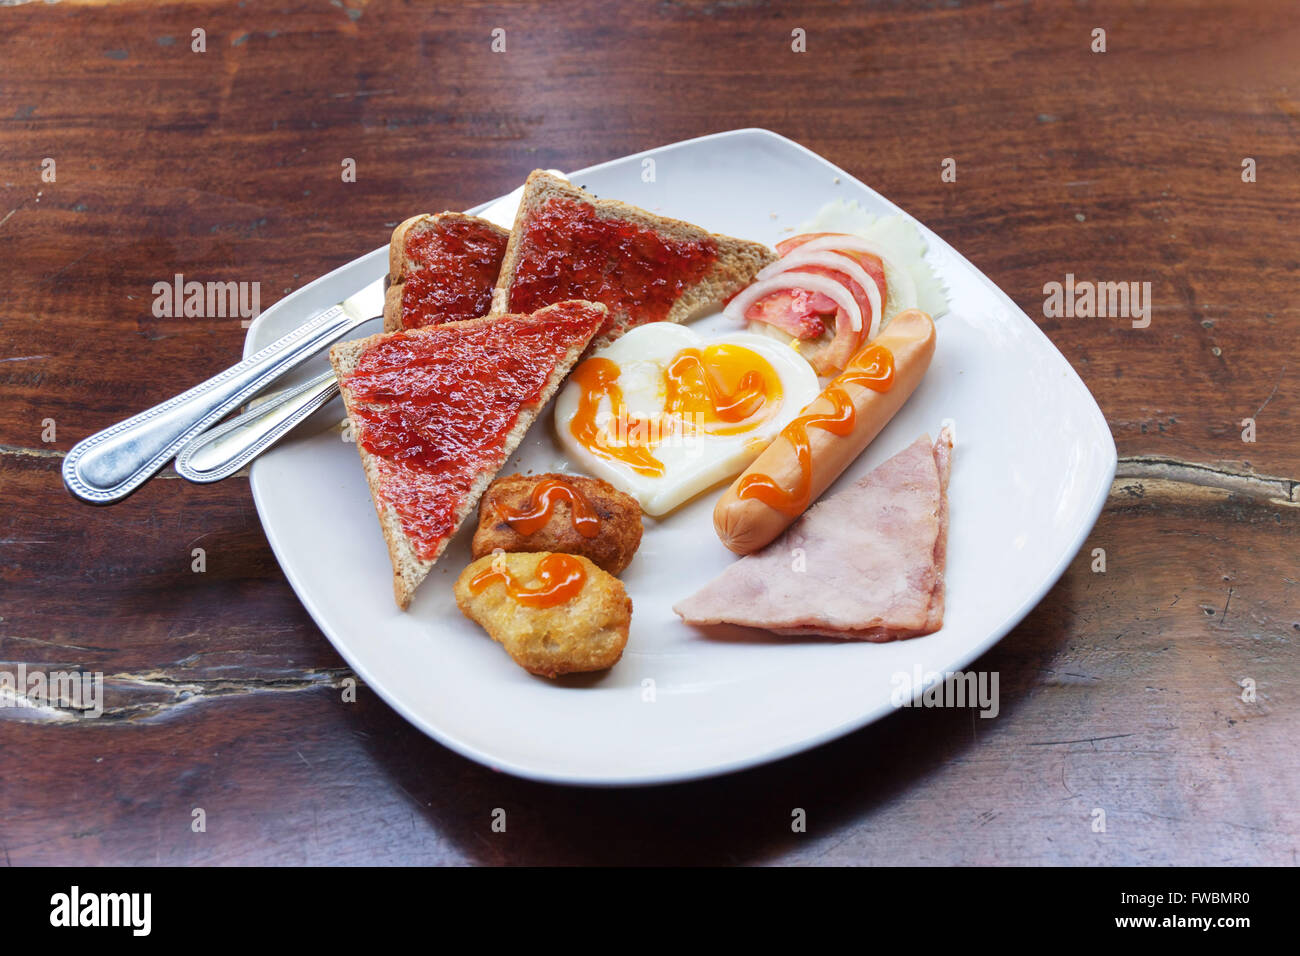 America breakfast and salads on wood table in morning Stock Photo